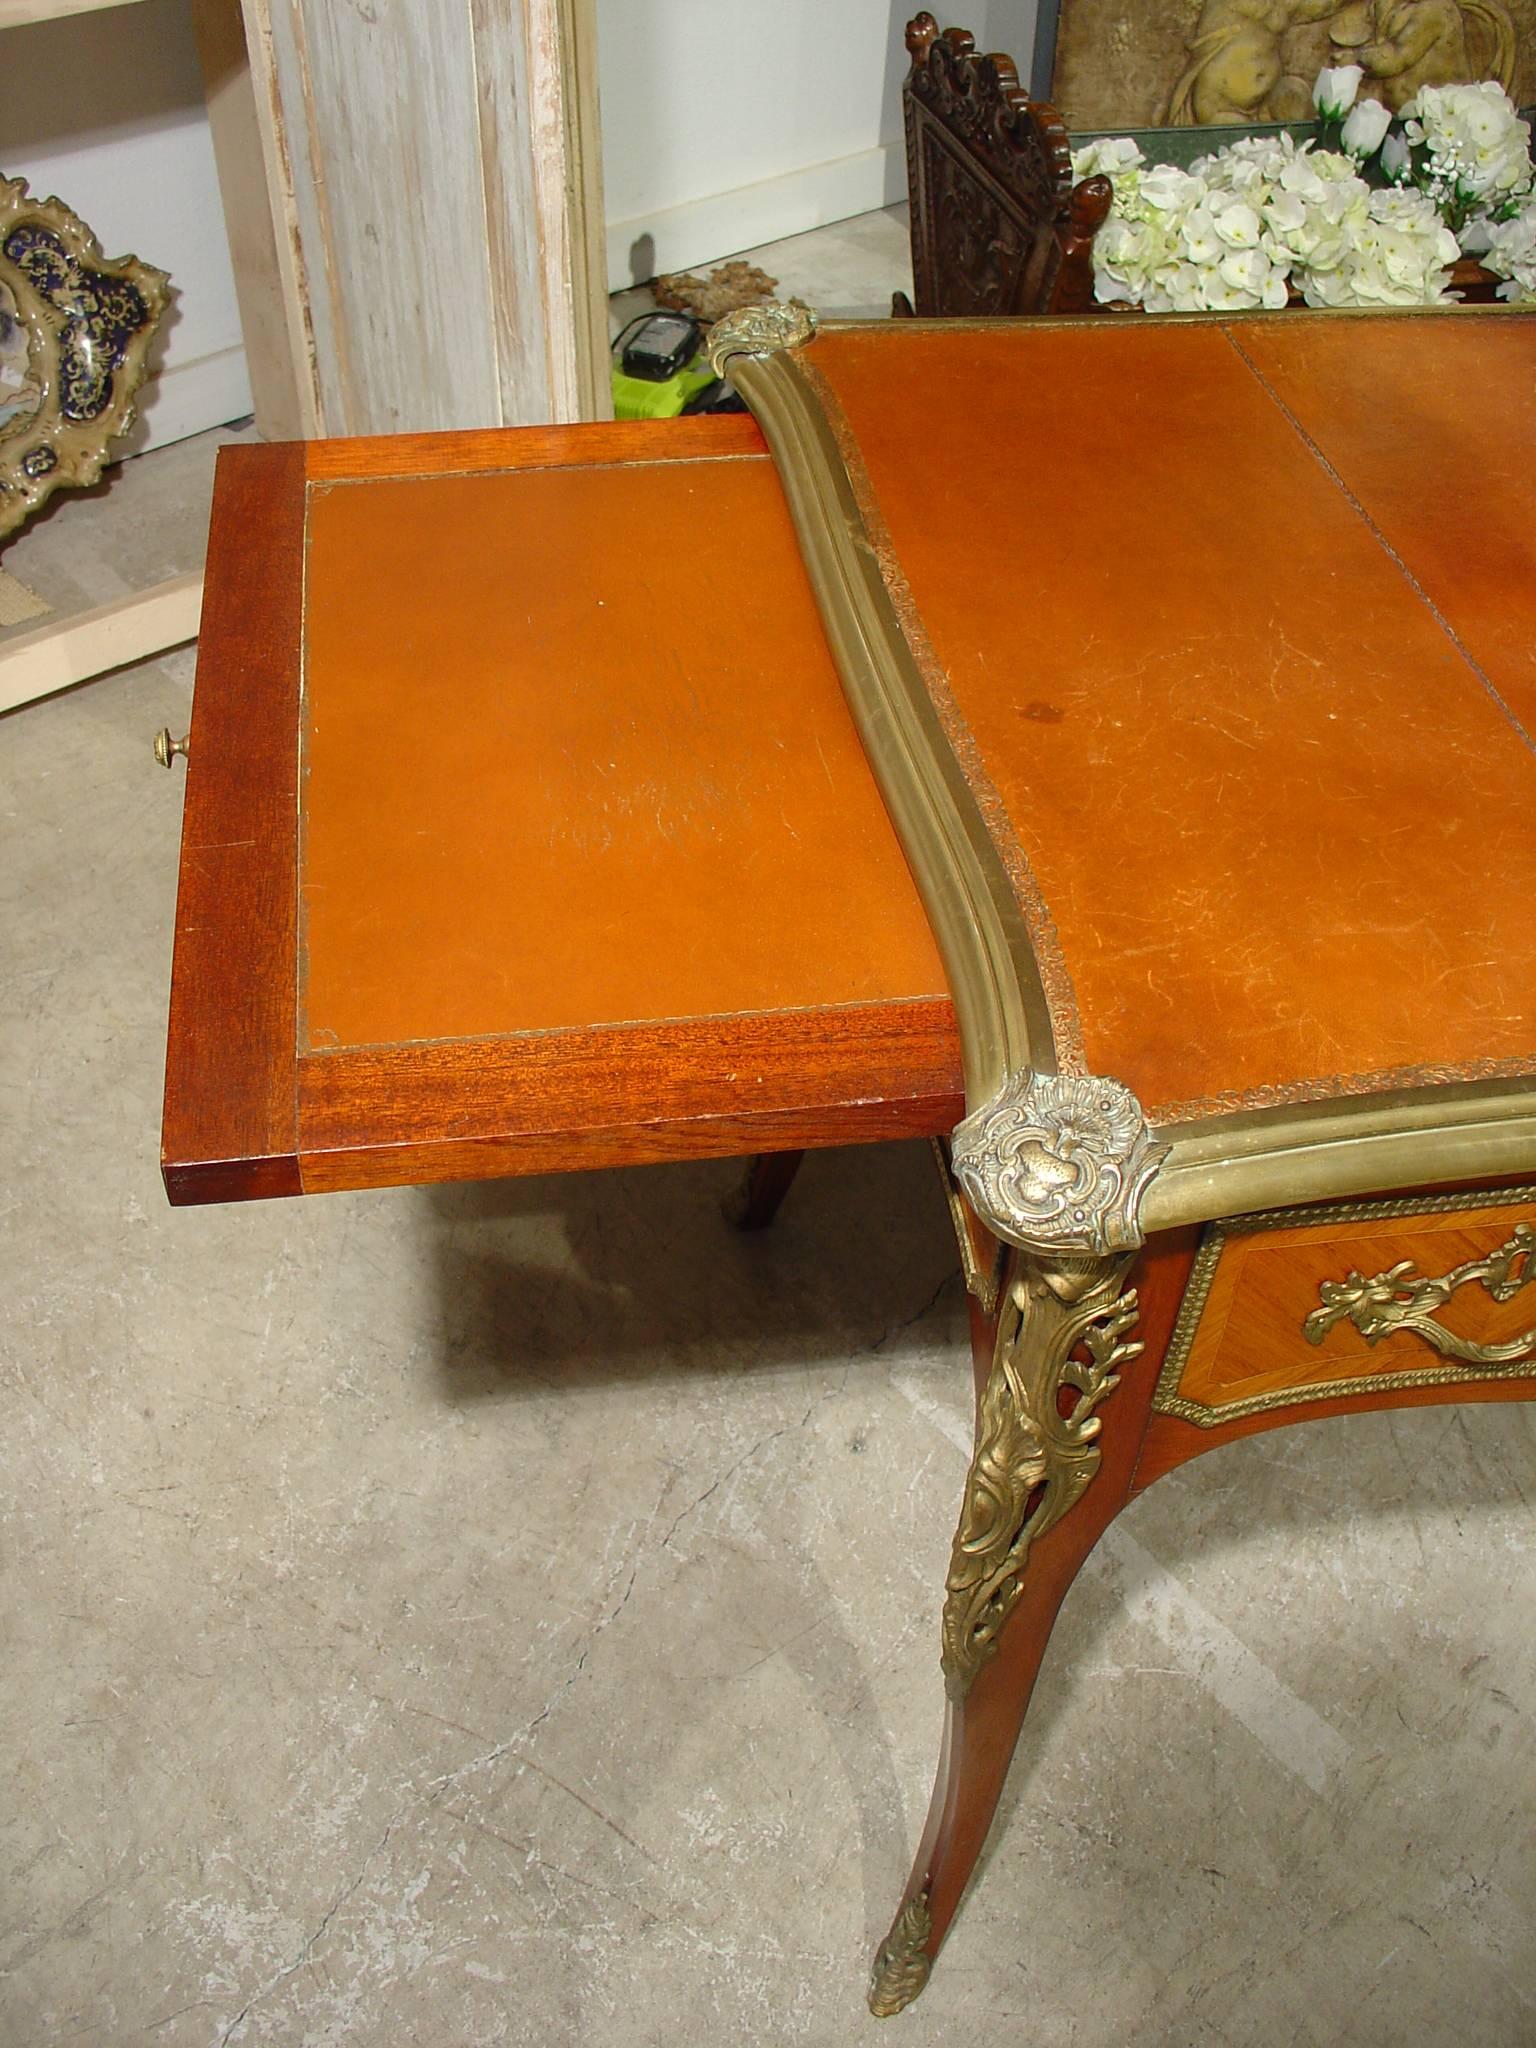 This elegant Louis XV Style bureau plat or rectangular wood writing desk has an embossed leather paneled top with ormolu motifs and moldings.  There are three drawers with the center drawer being recessed and the flanking drawers flush with the